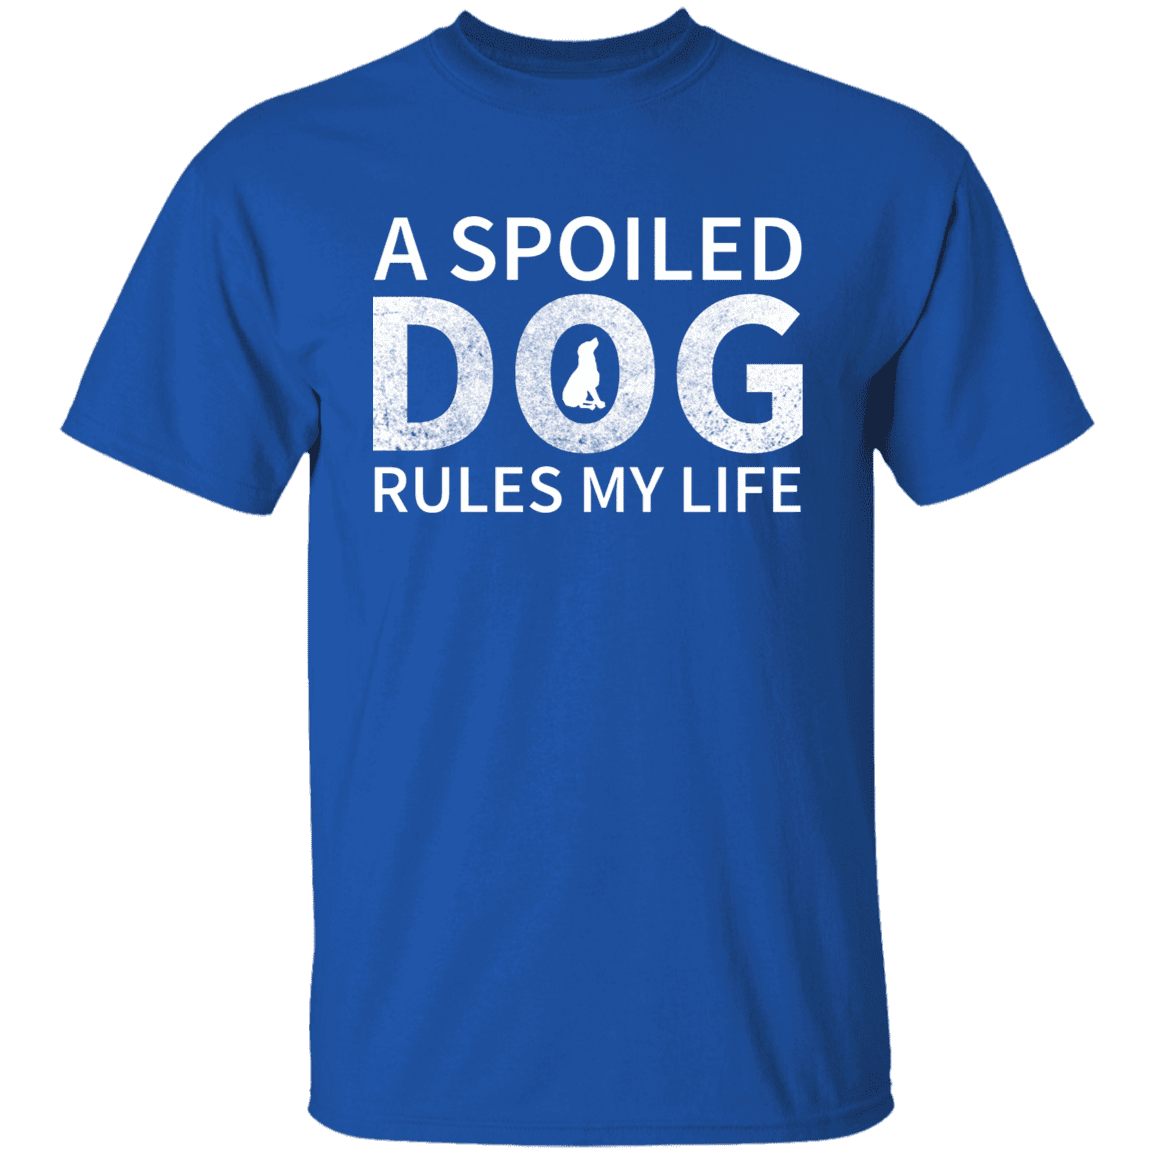 A Spoiled Dog Rules My Life - T Shirt.